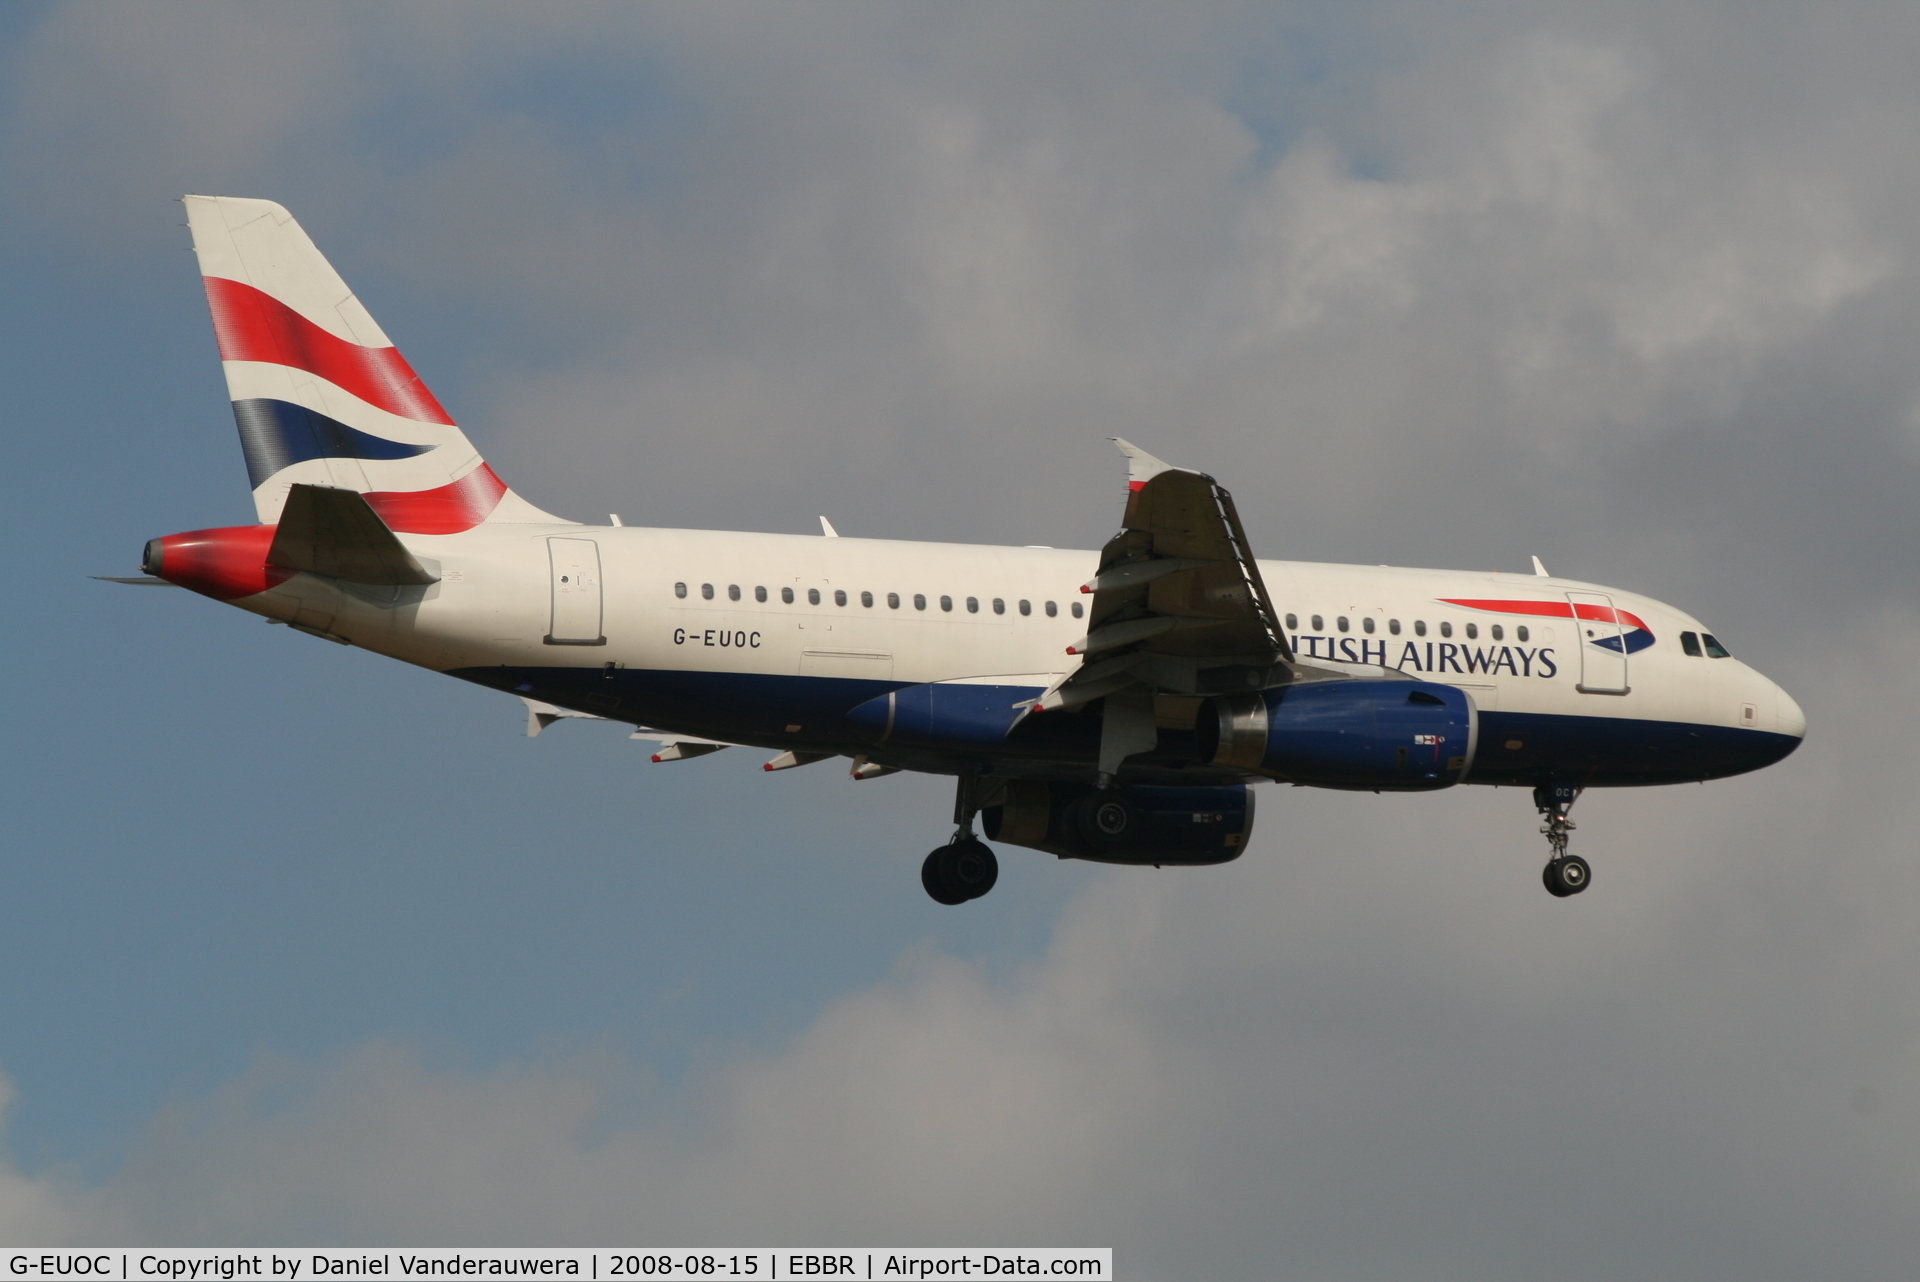 G-EUOC, 2001 Airbus A319-131 C/N 1537, arrival of flight BA392 to rwy 02